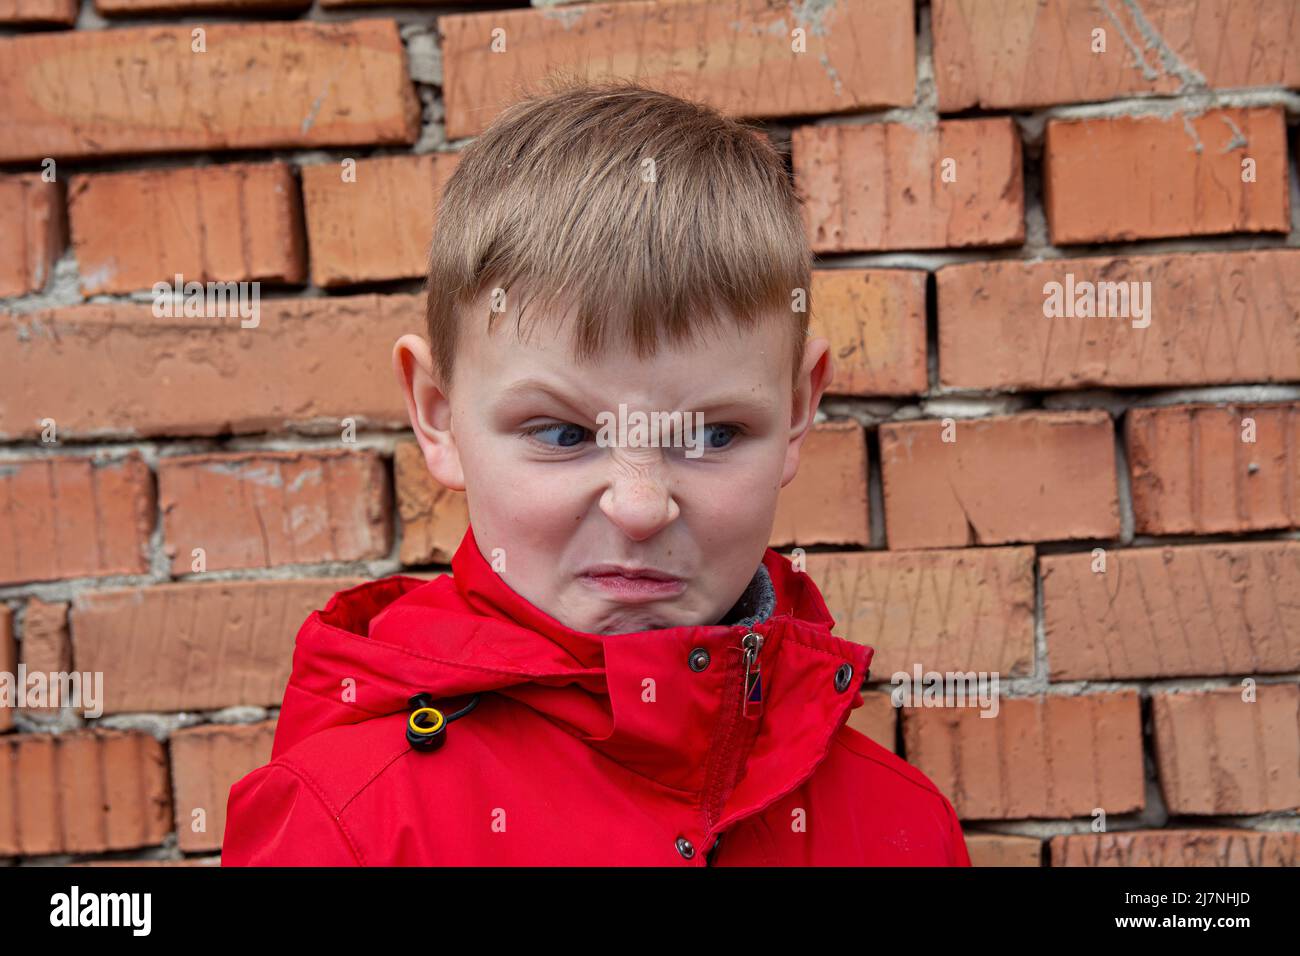 The boy is grimacing in anger. Angry face of a boy in a red jacket. Portrait of a caucasian angry boy. Stock Photo